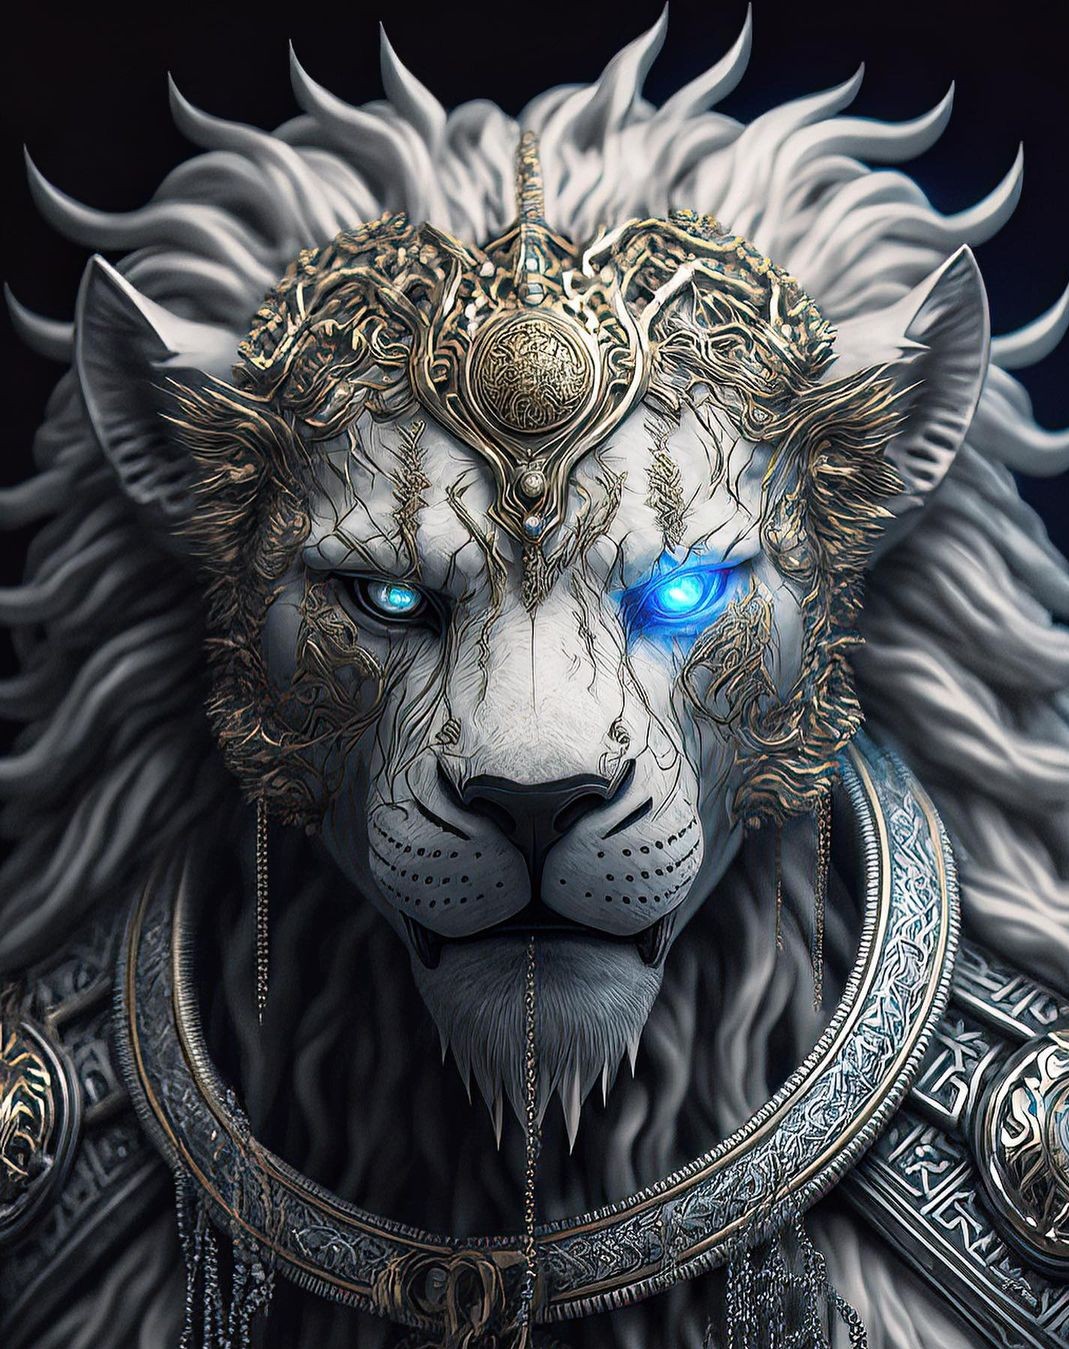 White Lion Bad Eyes Against Our Enemies 3D Comics Painting By ChAudharySAqlain7